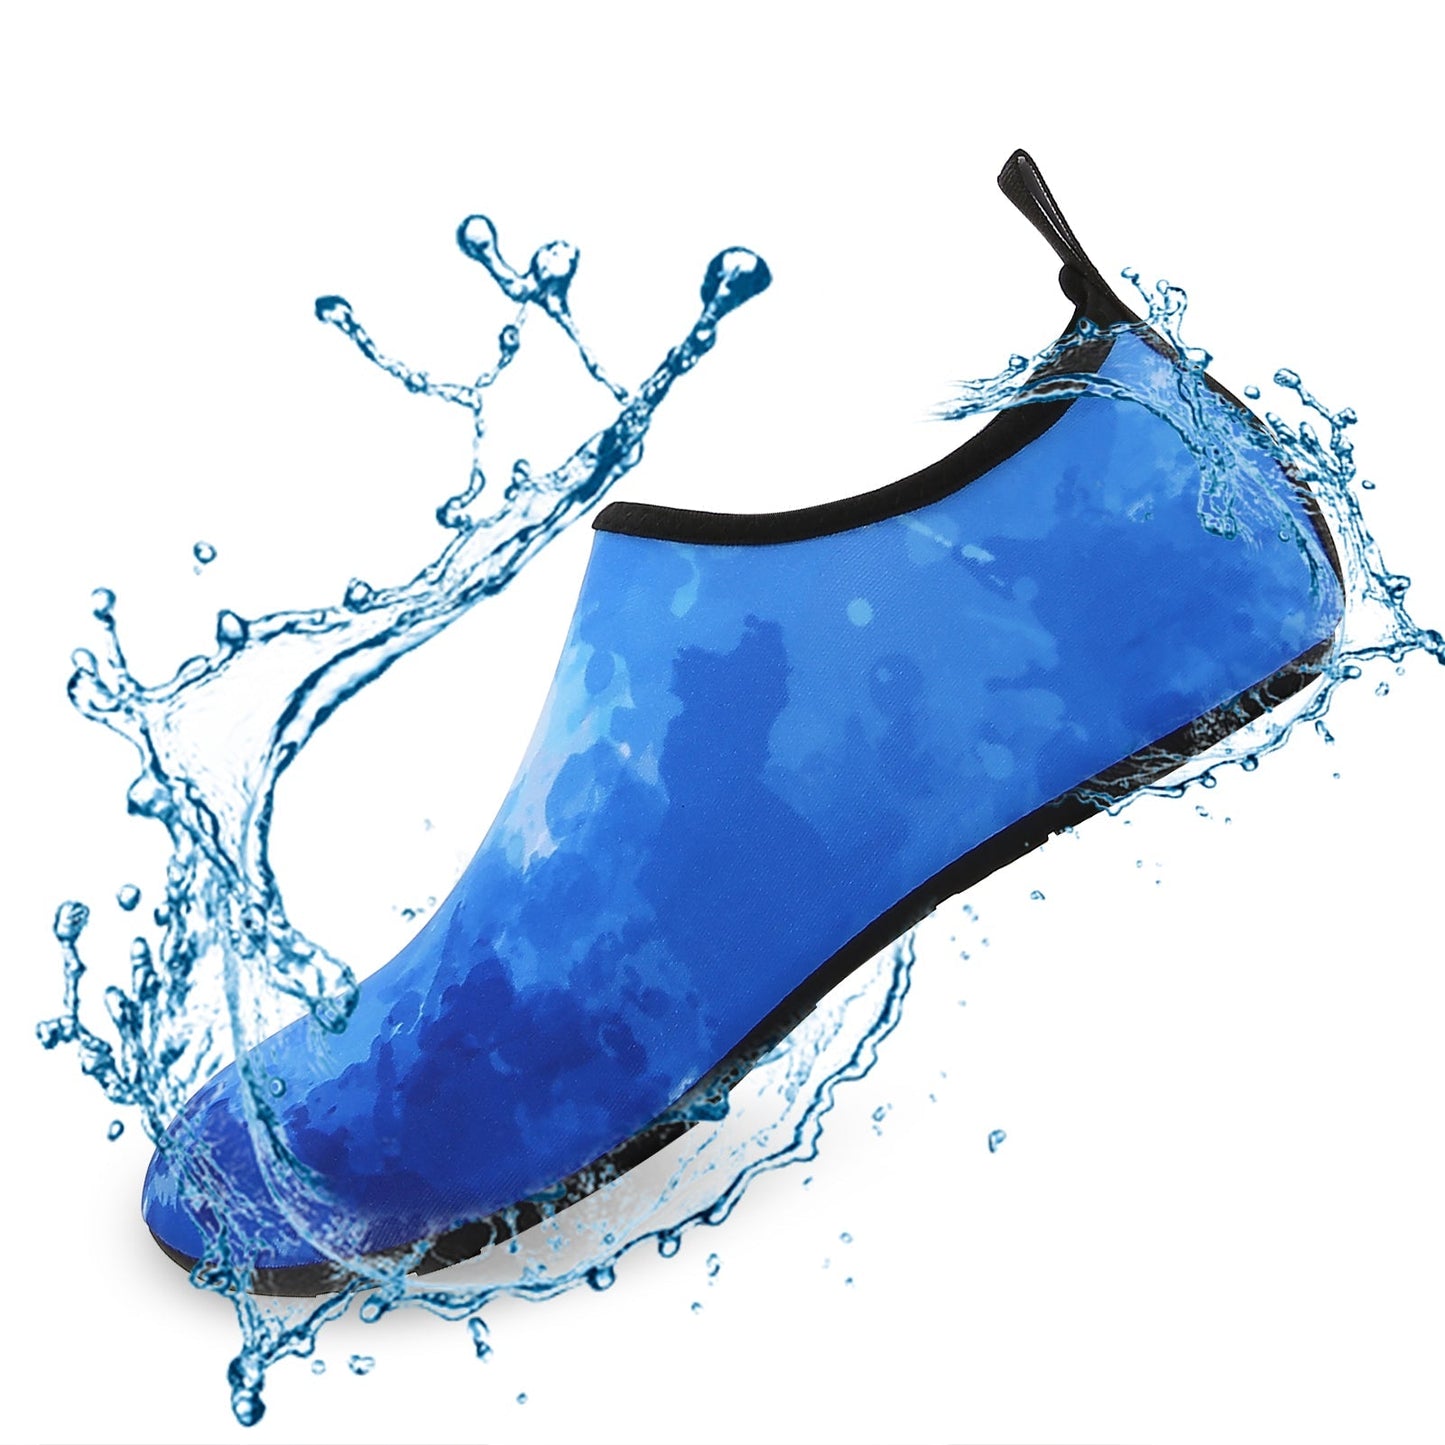 Men and Women a Slip On Barefoot Quick-Dry Beach Aqua Yoga Water Shoes (Watercolor/Blue)